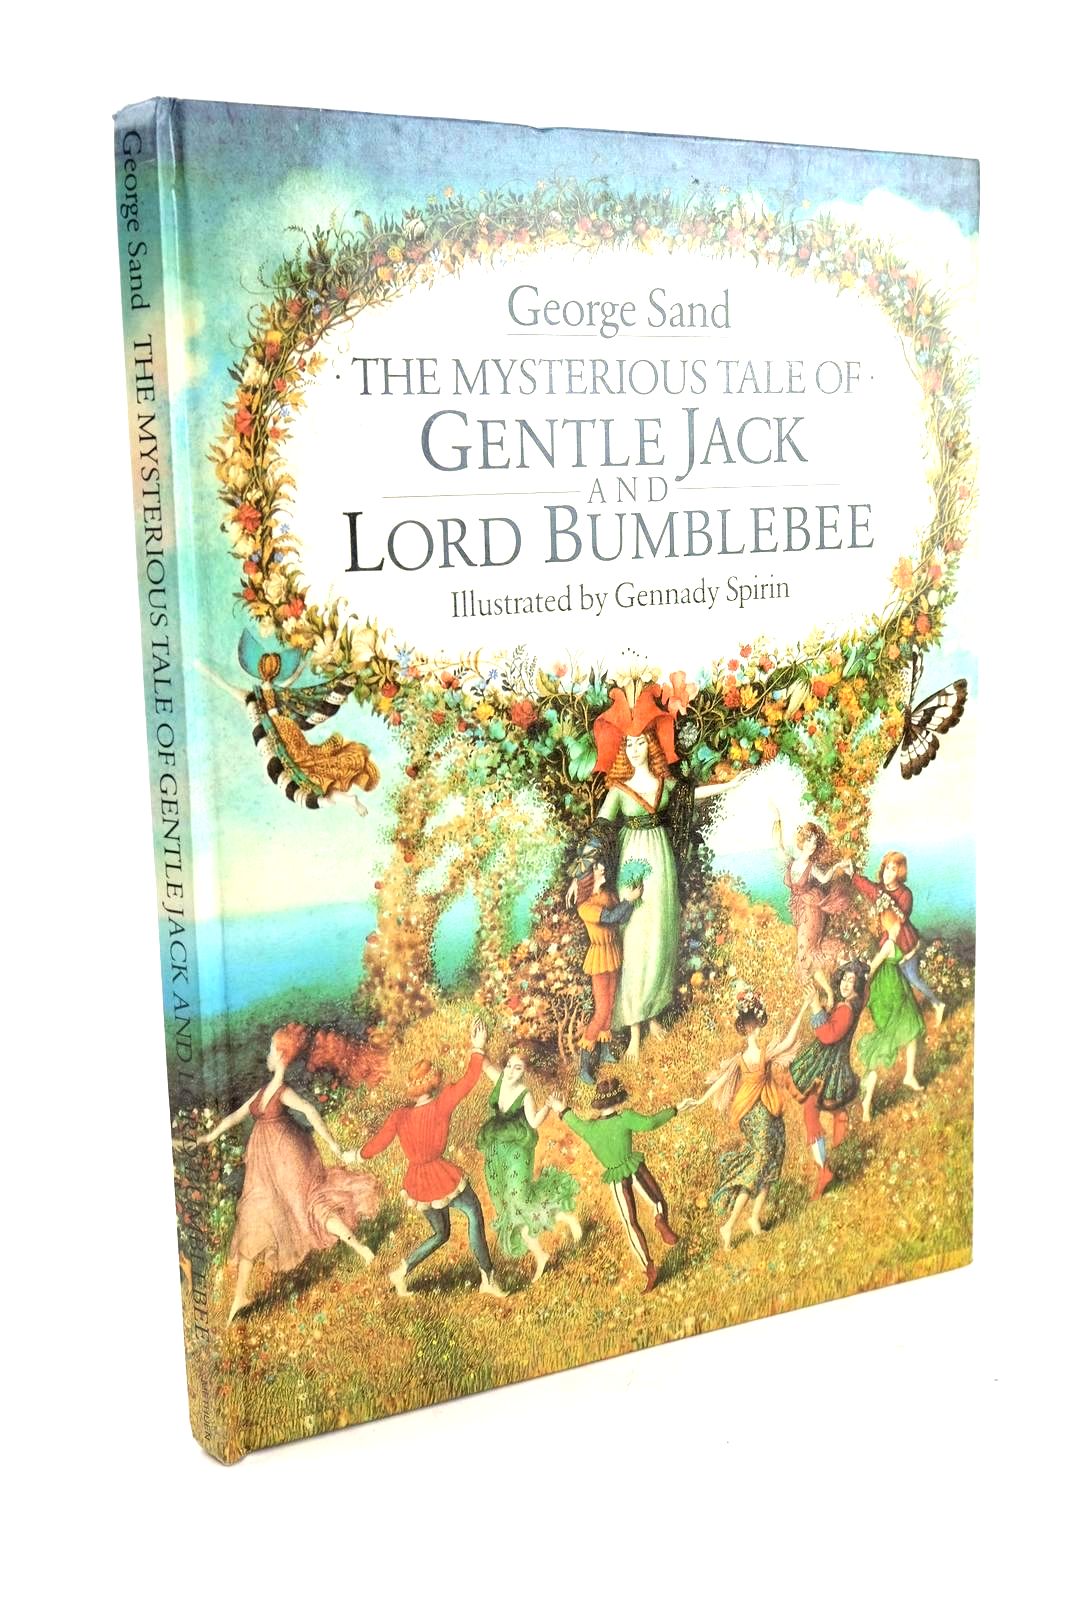 Photo of THE MYSTERIOUS TALE OF GENTLE JACK AND LORD BUMBLEBEE written by Sand, George Jacobson, Gela illustrated by Spirin, Gennady published by Methuen Children's Books (STOCK CODE: 1324378)  for sale by Stella & Rose's Books